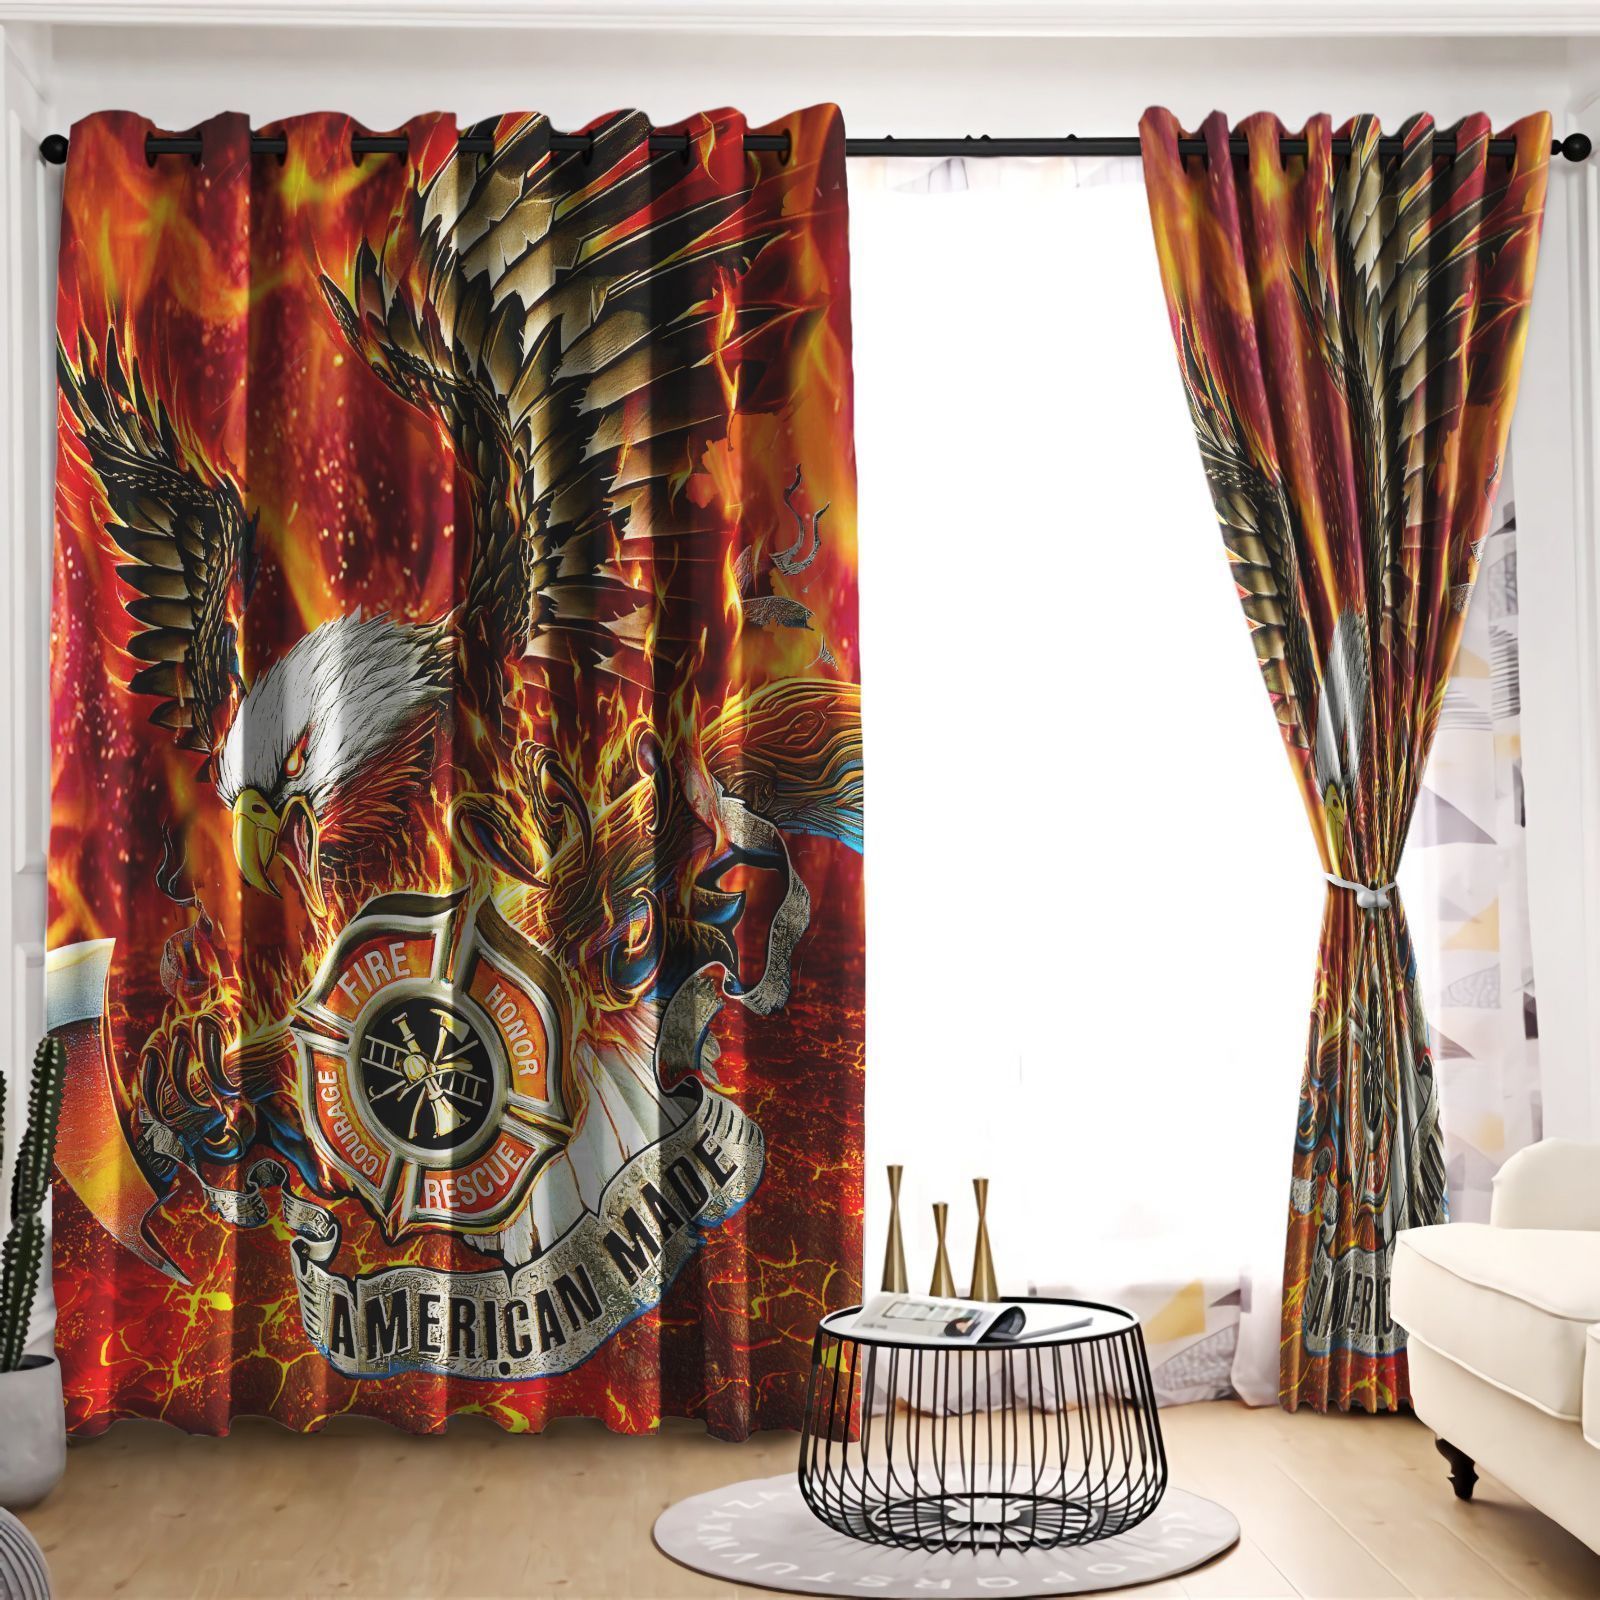 Firefighter American Made Eagle Printed Window Curtain Home Decor